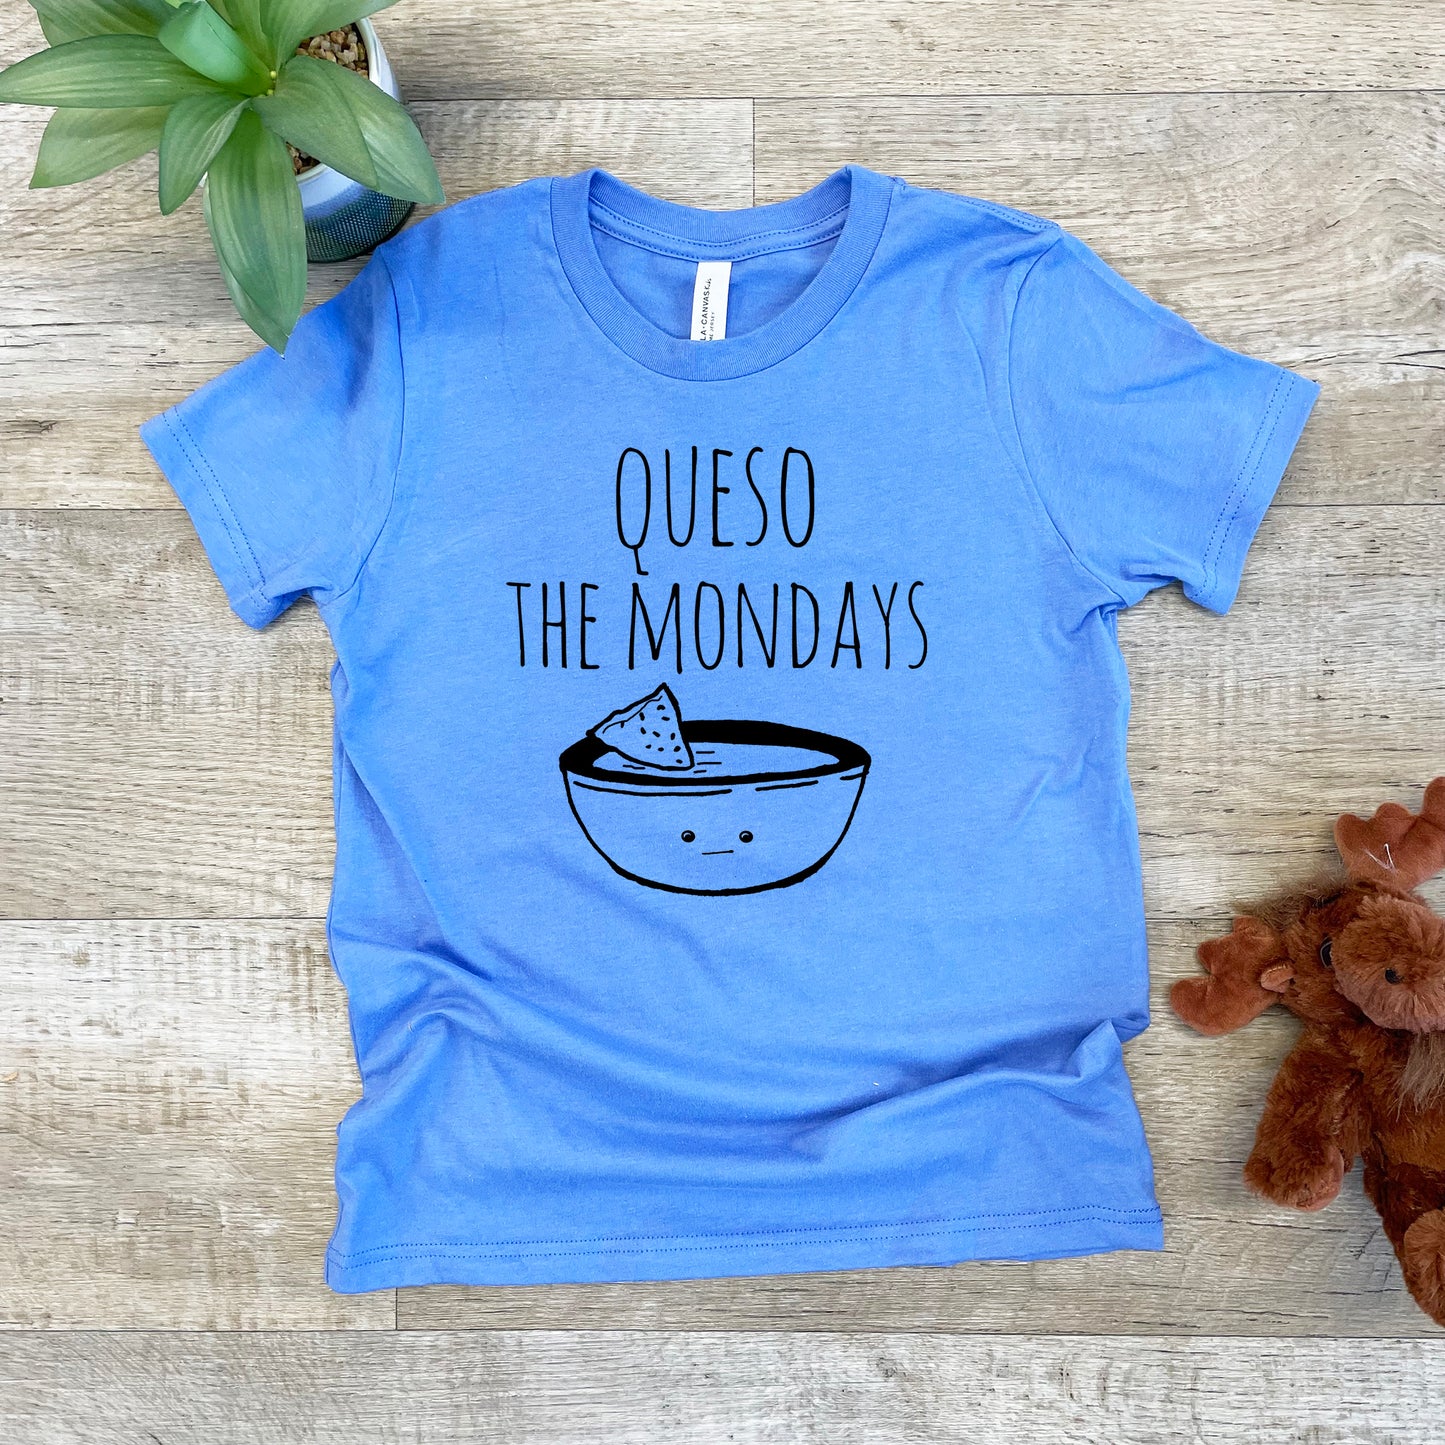 Queso The Mondays (Tacos) - Kid's Tee - Columbia Blue or Lavender